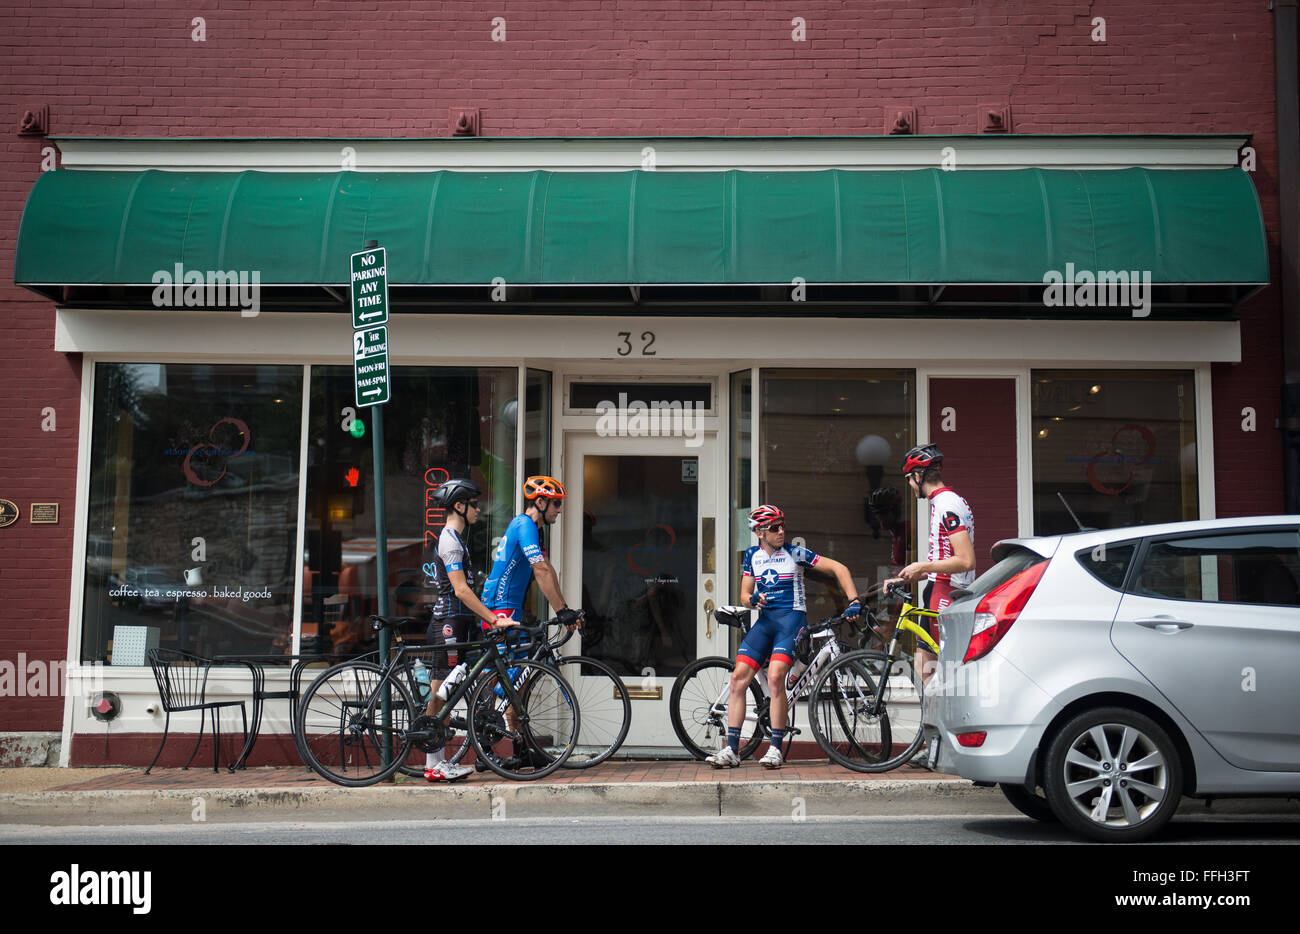 After reaching the halfway point of a conversational-pace bike ride Senior Airman David Flaten and his friends take a moment to relax, eat and drink at a local coffee shop in Staunton, Virginia. Flaten and his friends often meet up and ride to and from the coffee shop during a slower-paced training day. Stock Photo